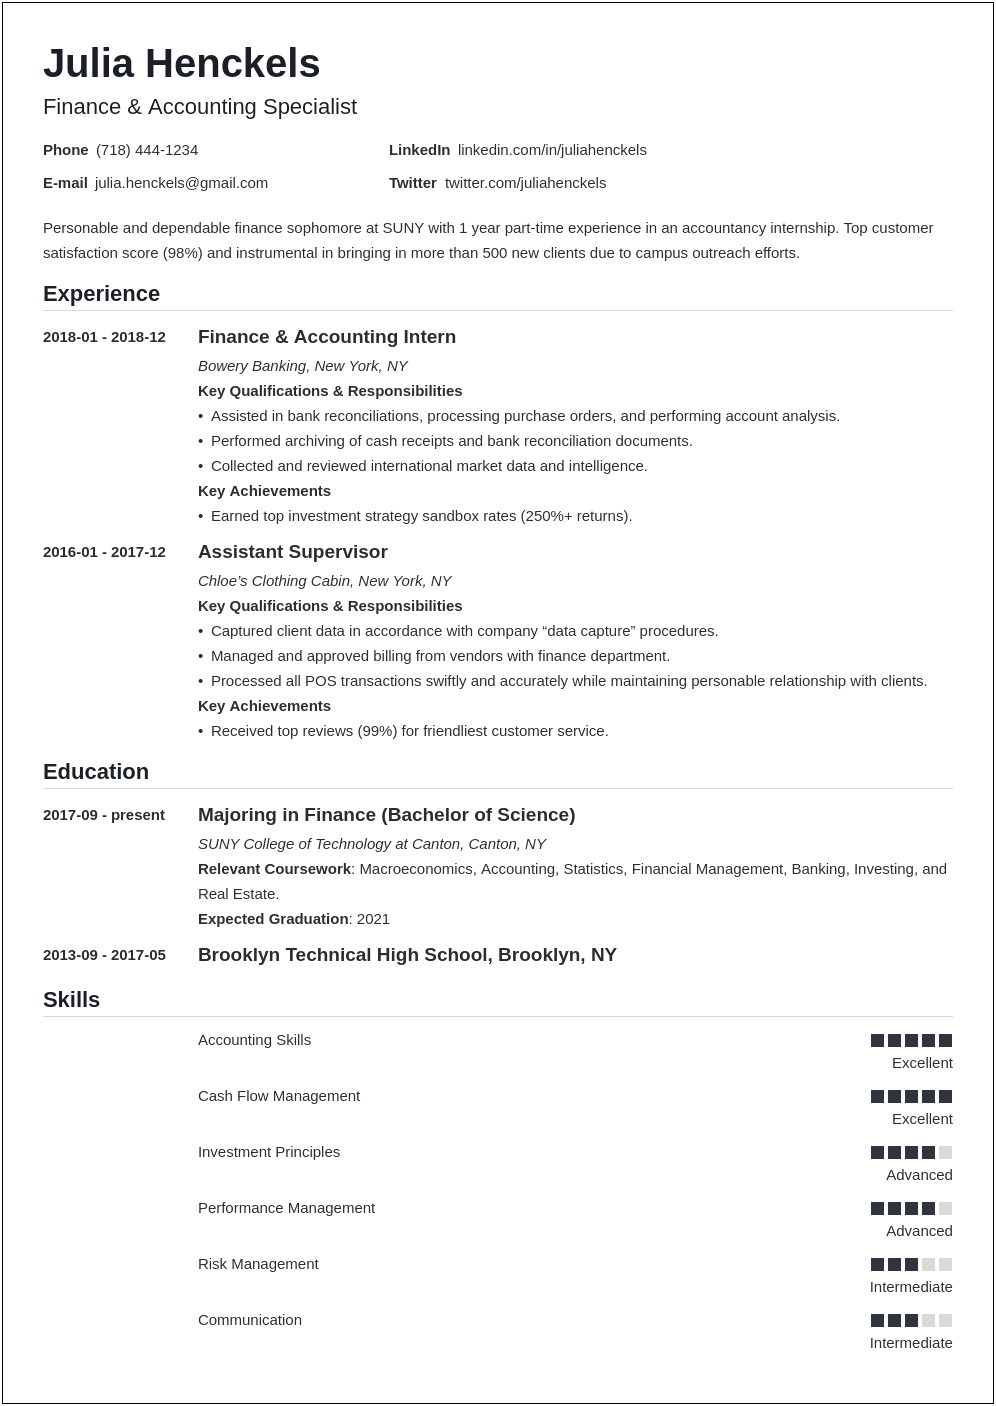 Contact Center Manager Resume Sample Accomplishments